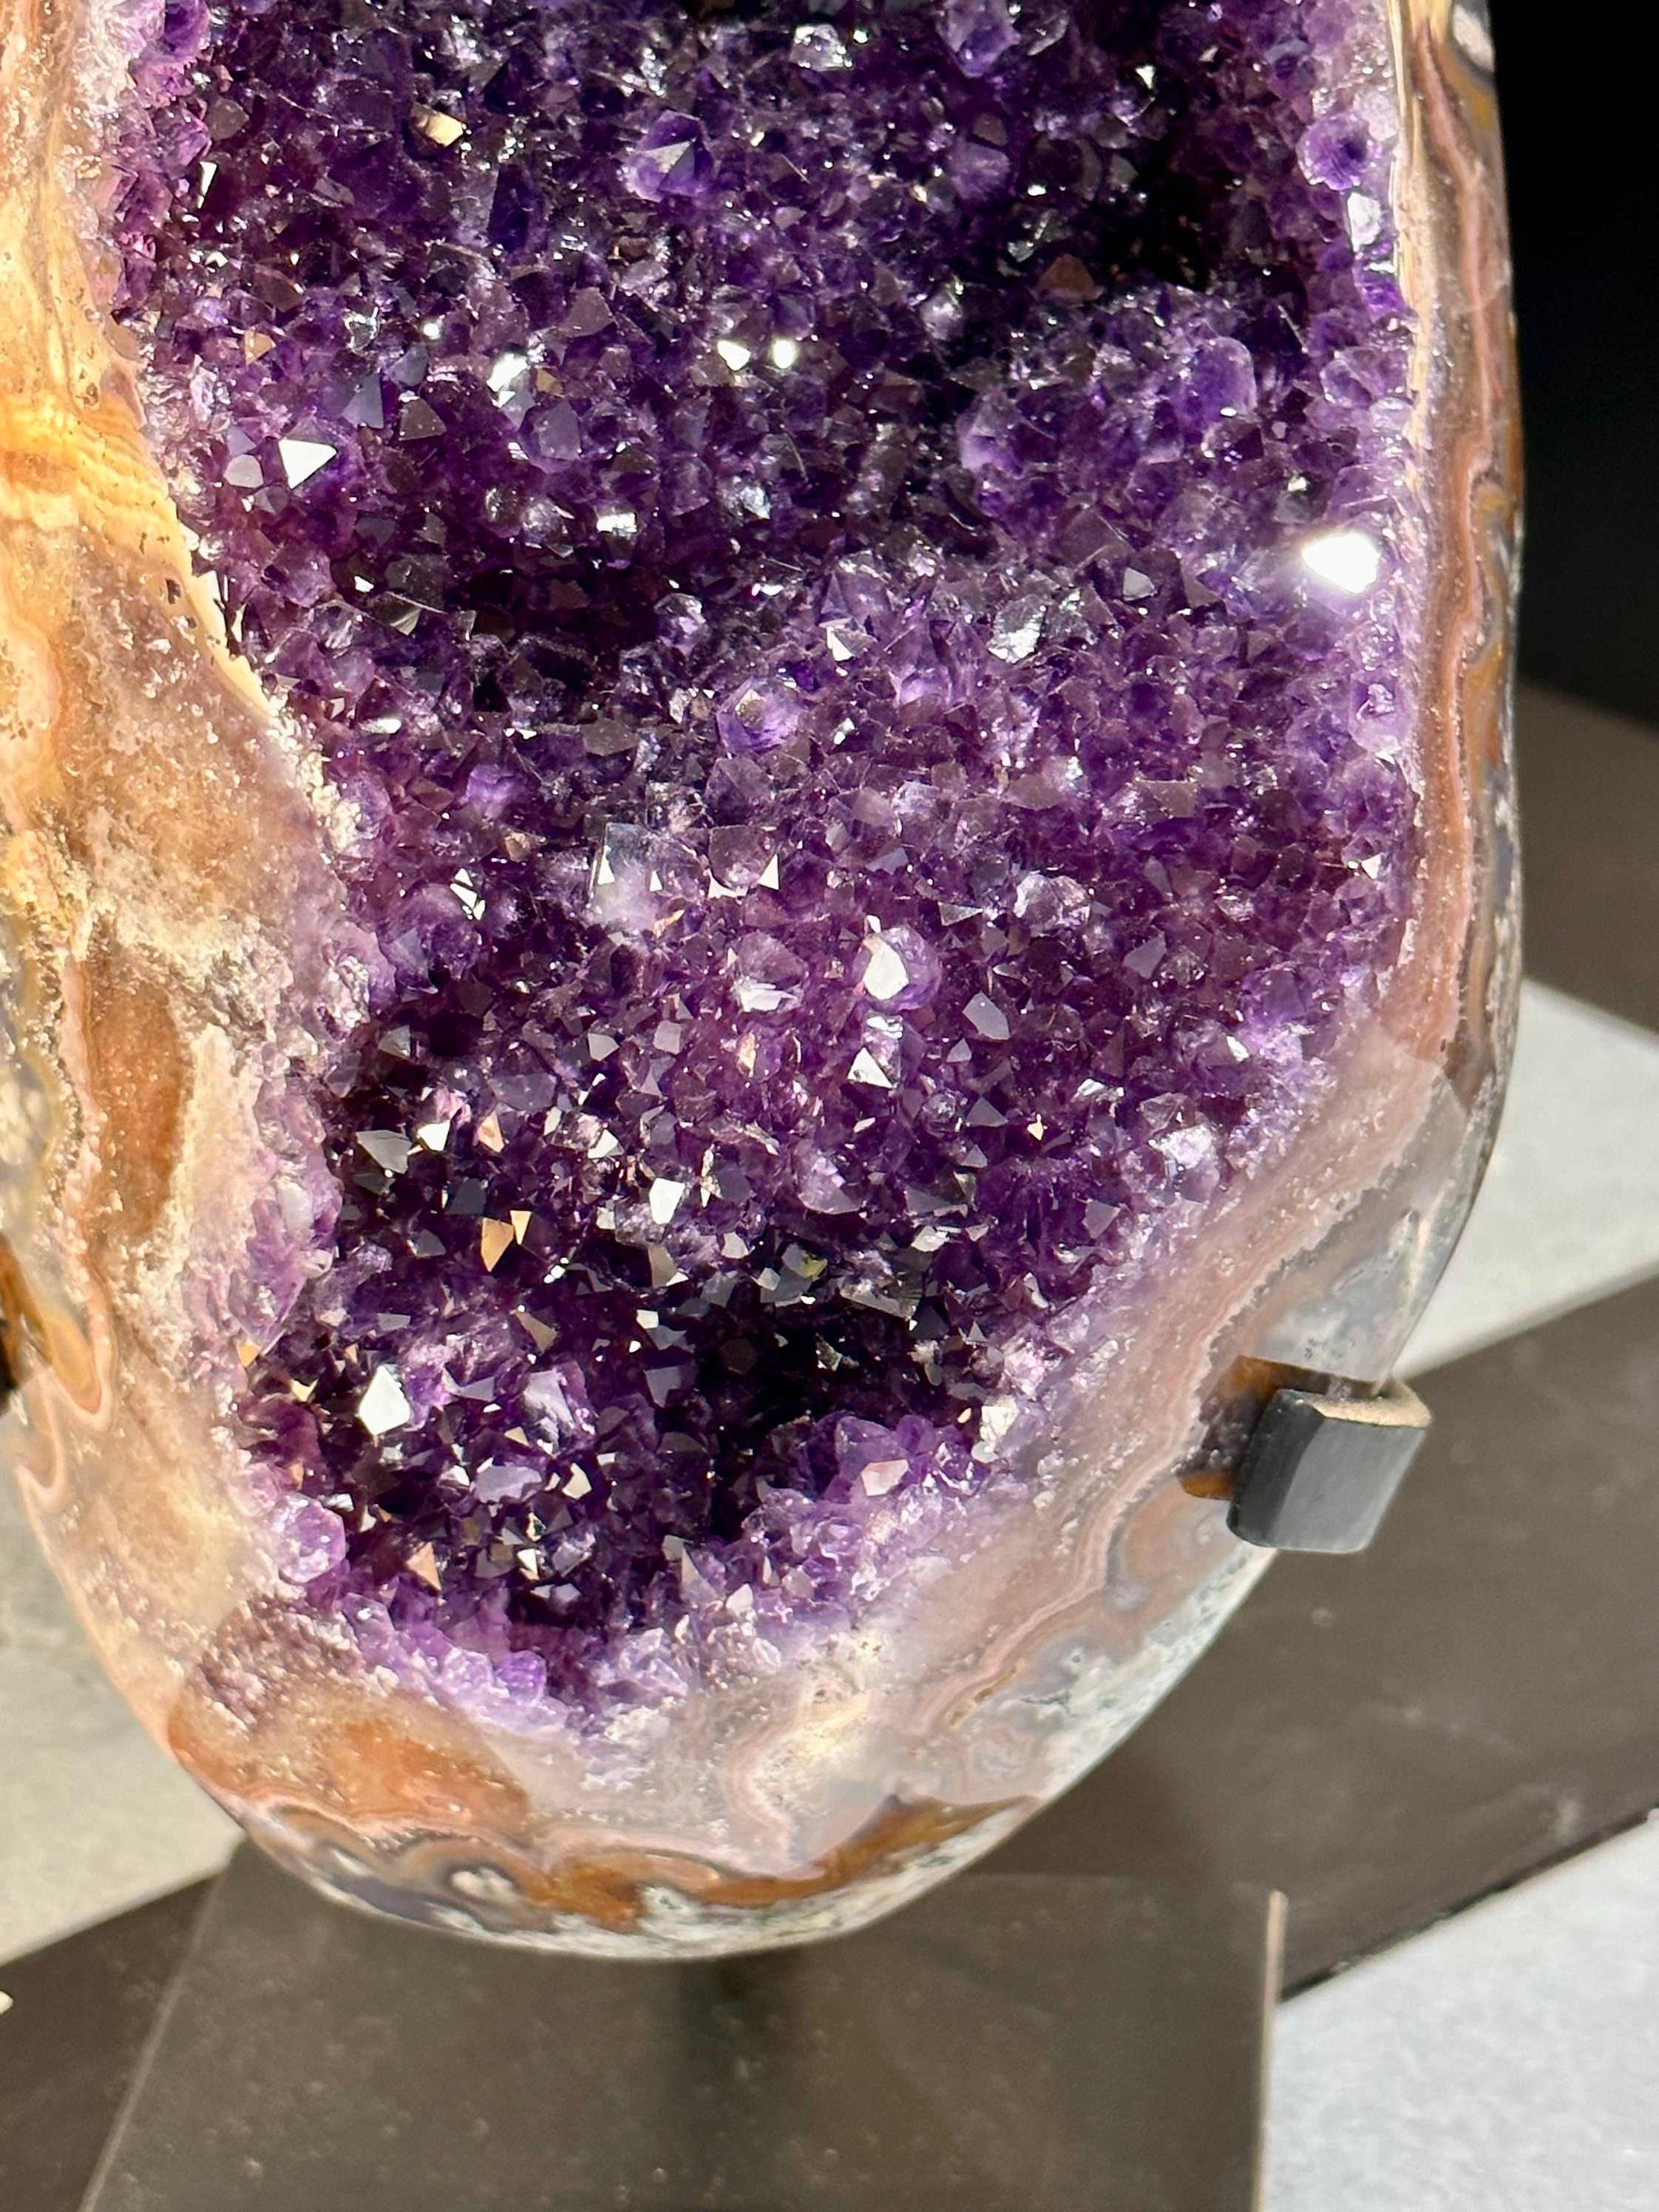 Mystical Amethyst Geode - Decorative Crystals for Home Art - Elegant Geode Display - Natures Beauty - Decorative Amethyst Geode For Home